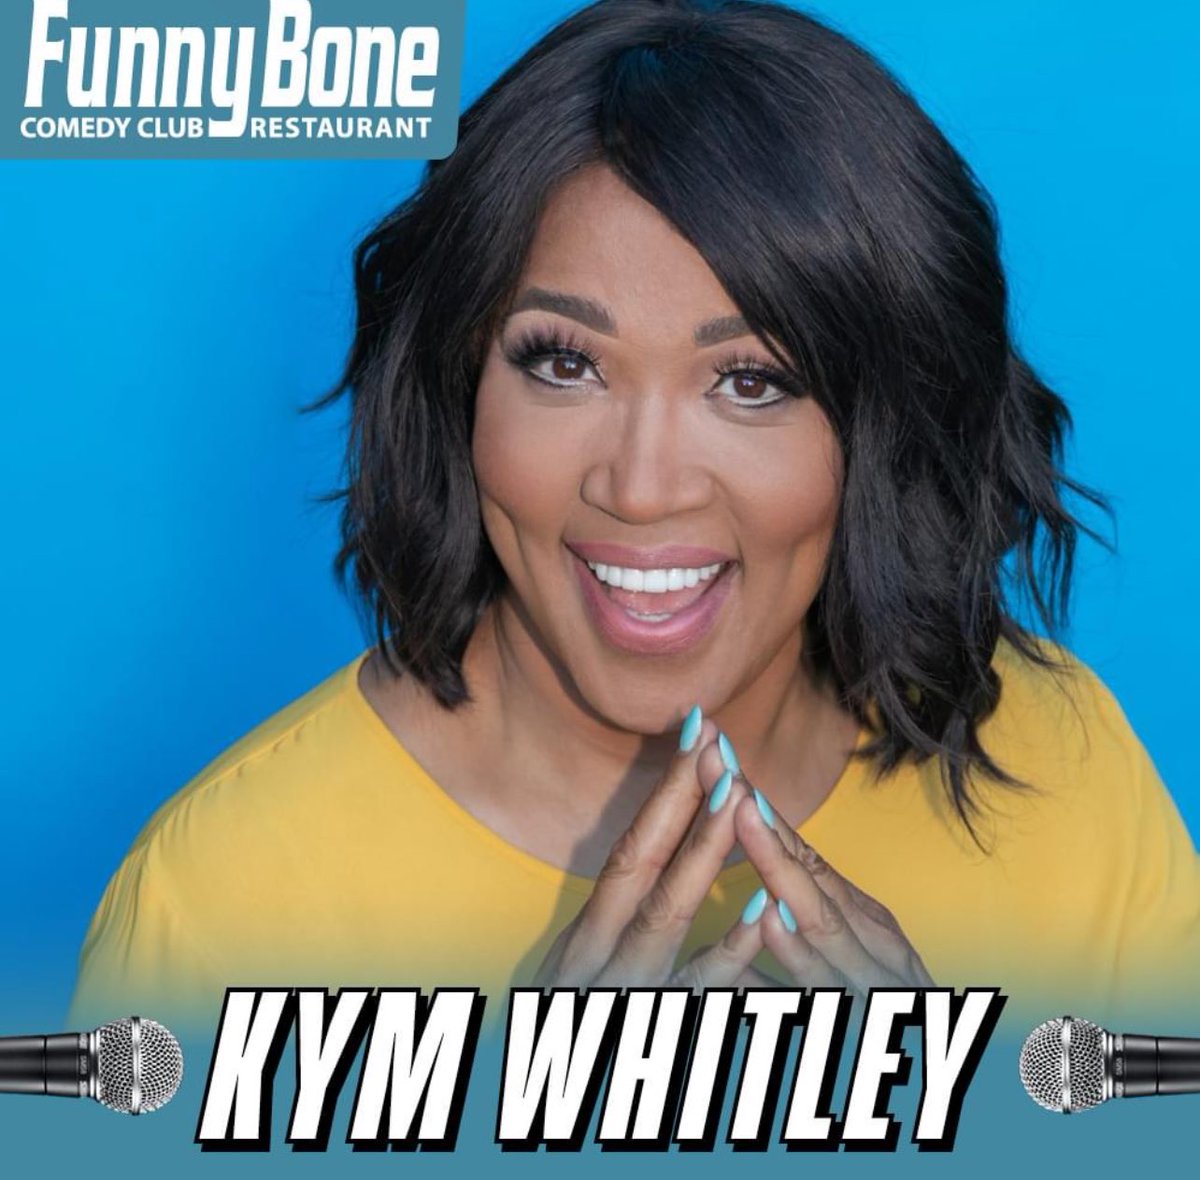 Make sure yall get those tickets to see my girl @kymwhitley Feb 9 & 10 @toledofunnybone HEY BOO ILL BE THERE!